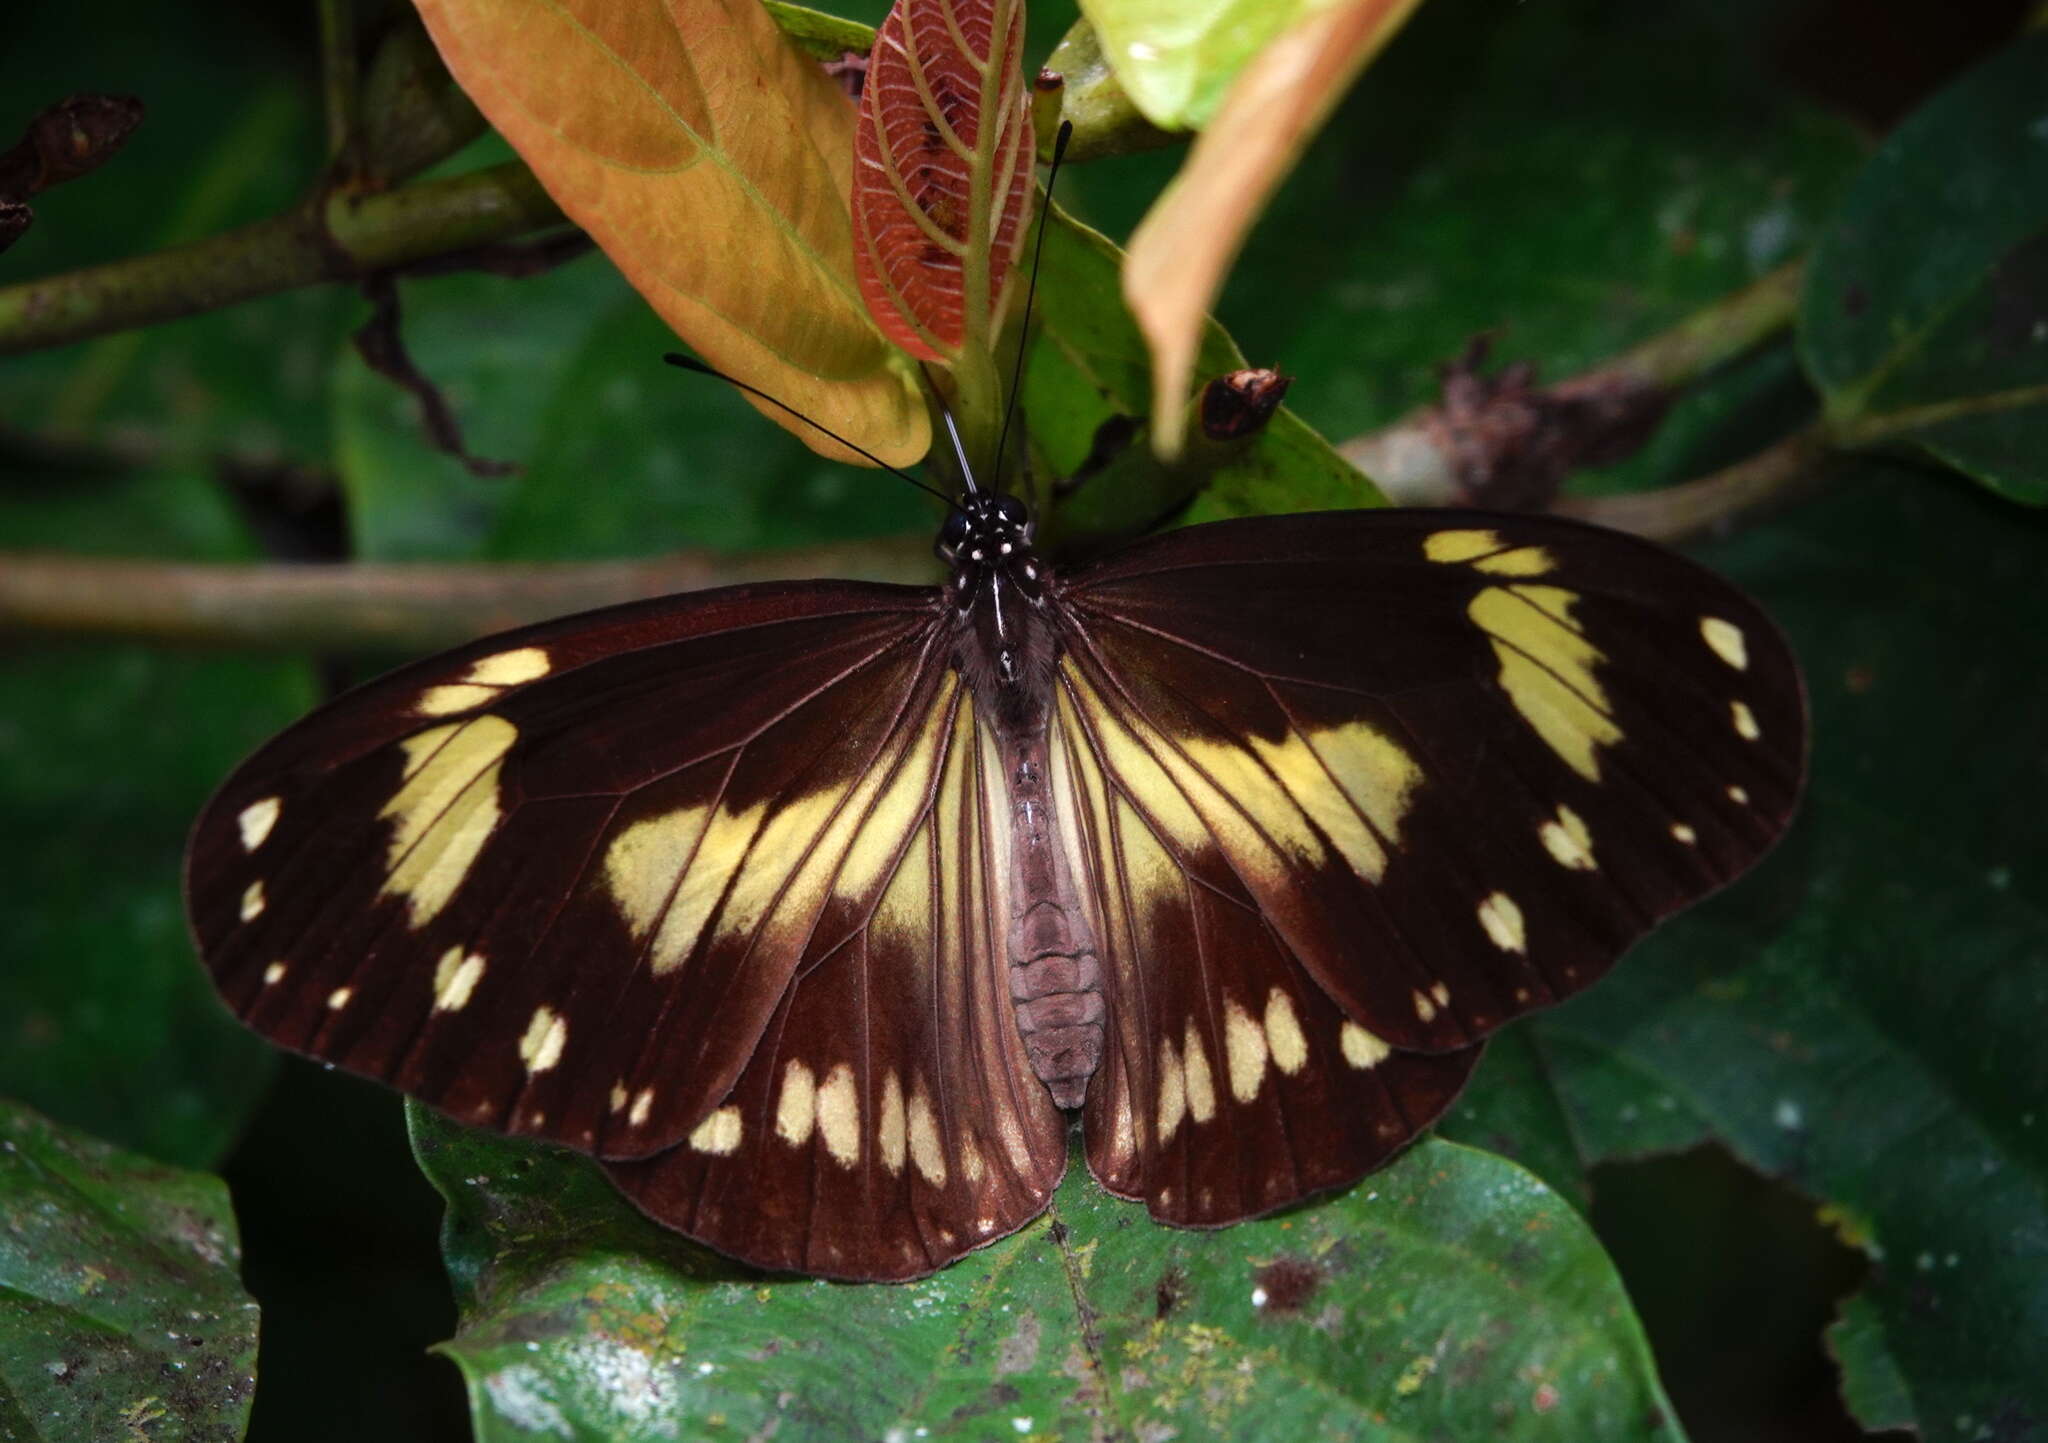 Image of Ideopsis